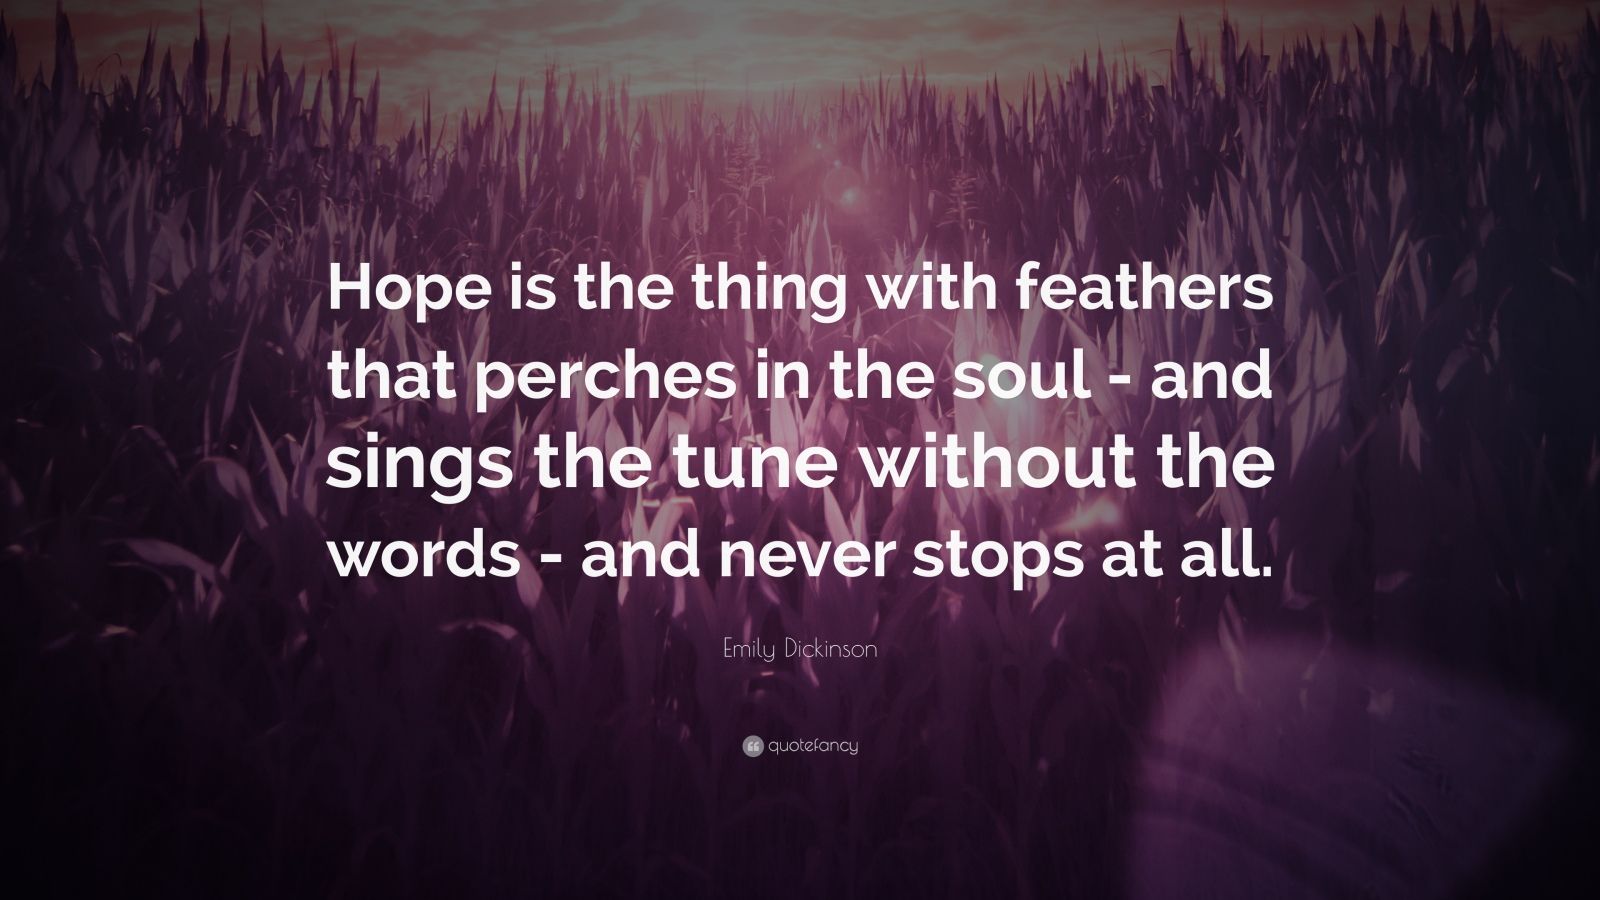 emily dickinson hope is the thing with feathers poem